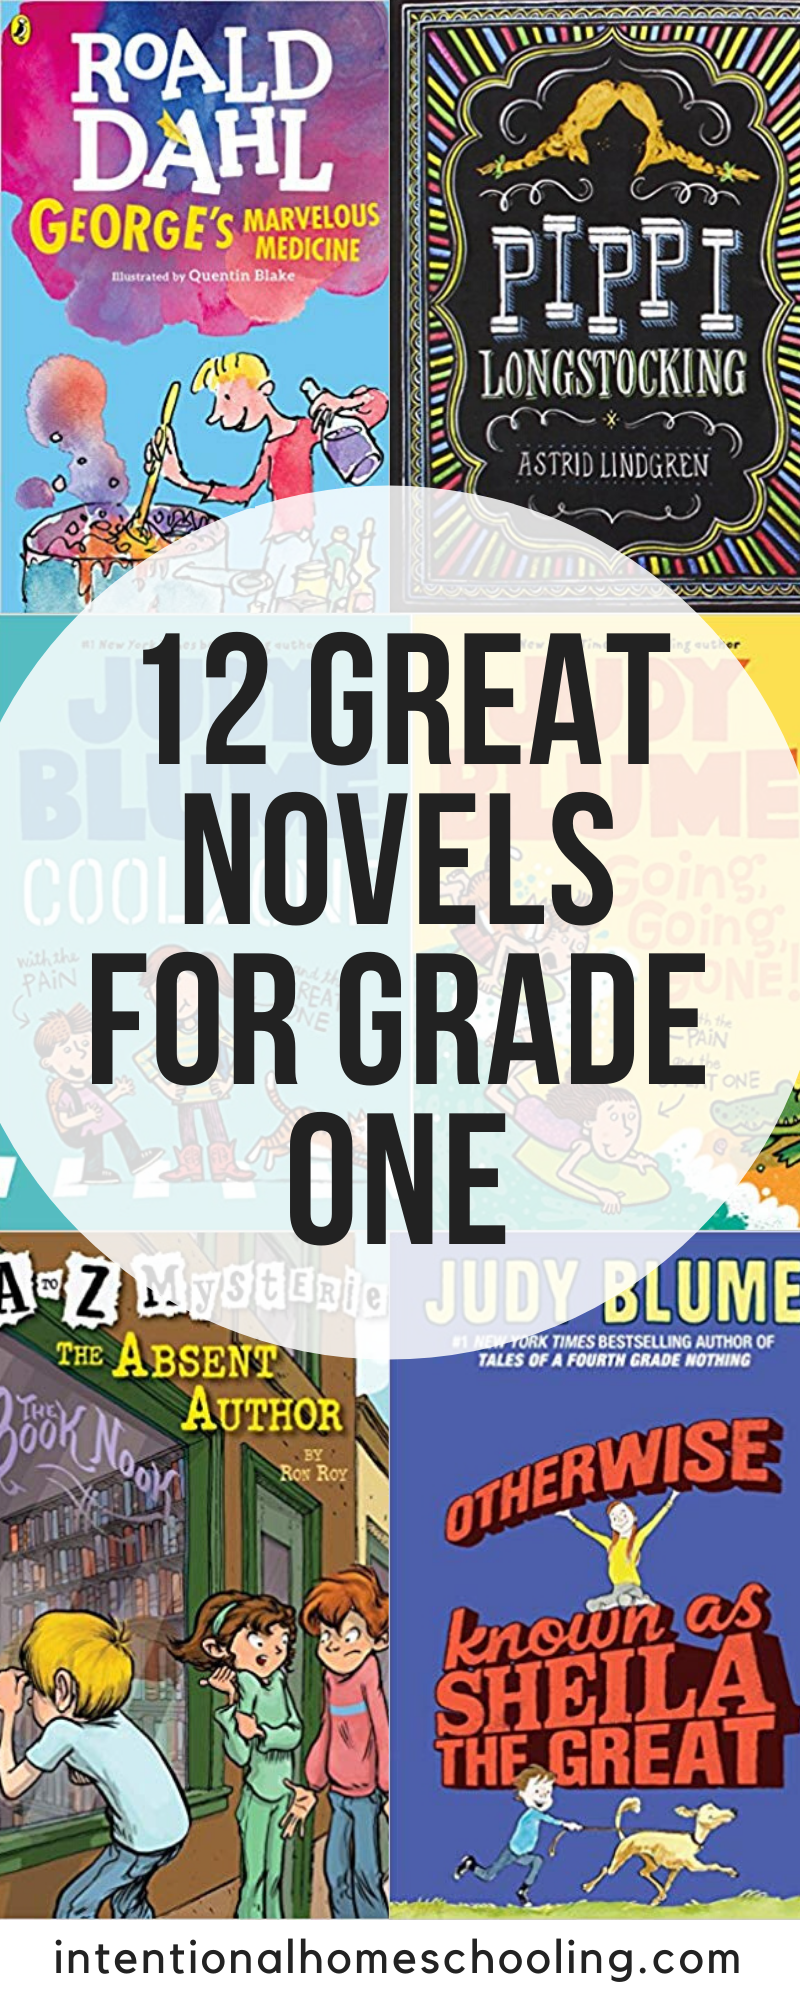 12 Great Novels for Grade One - great for read alouds or read alones